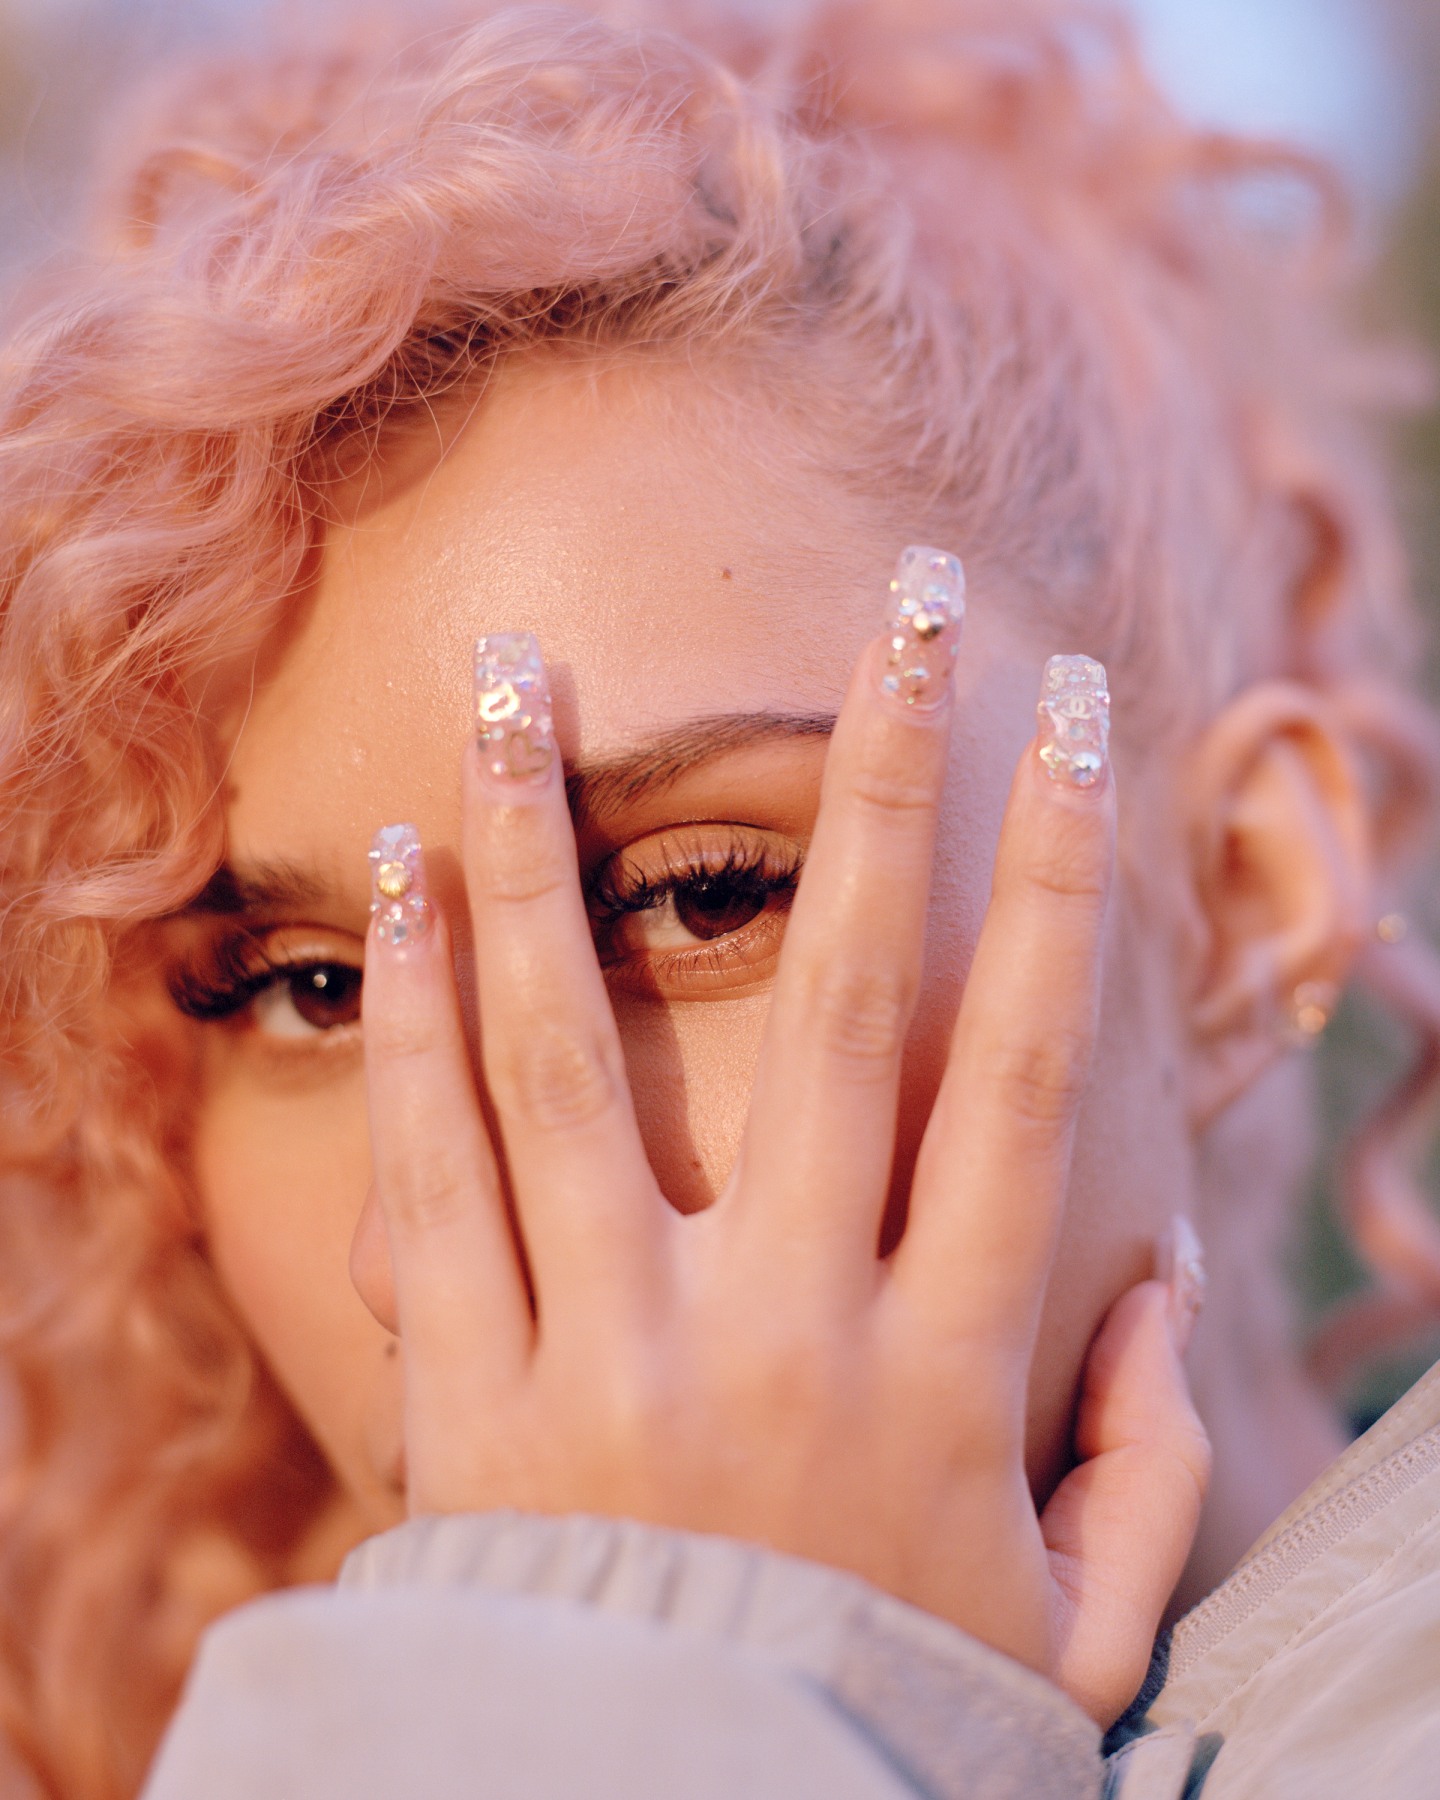 RAYE is going to be a star on her own terms